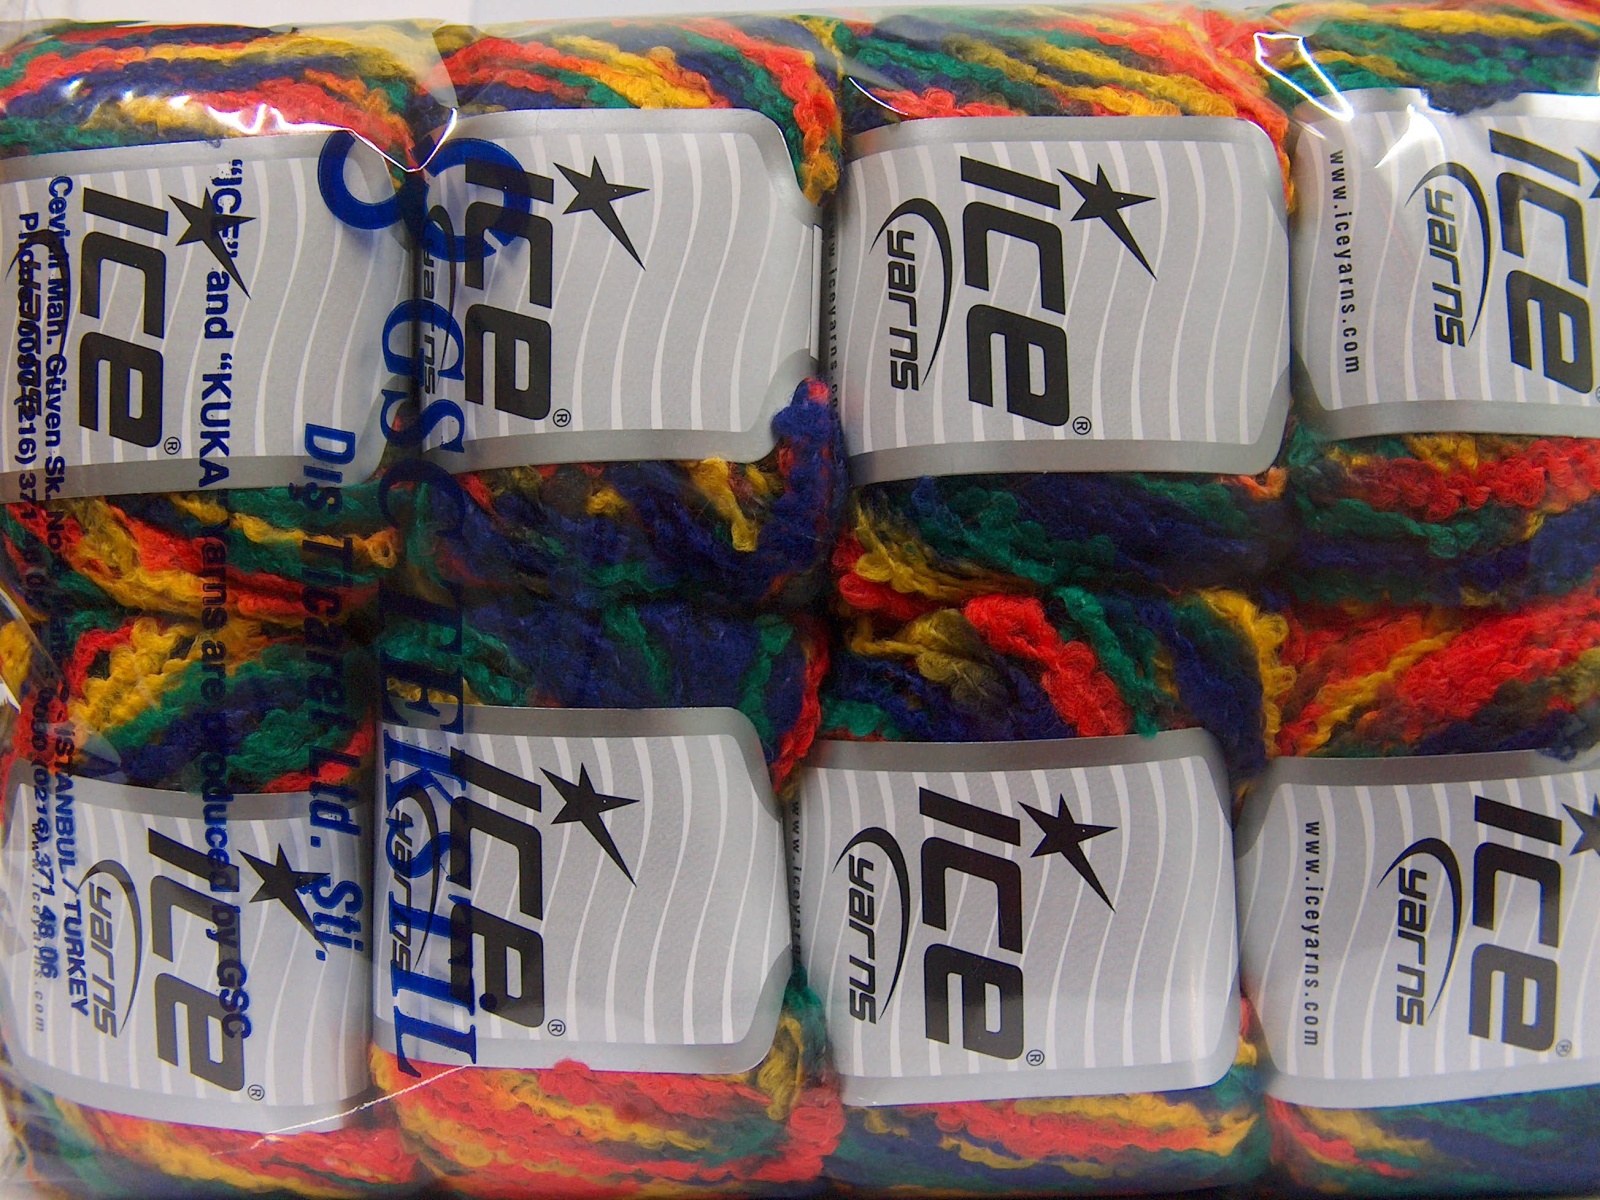 Puzzle Wool Worsted at Ice Yarns Online Yarn Store